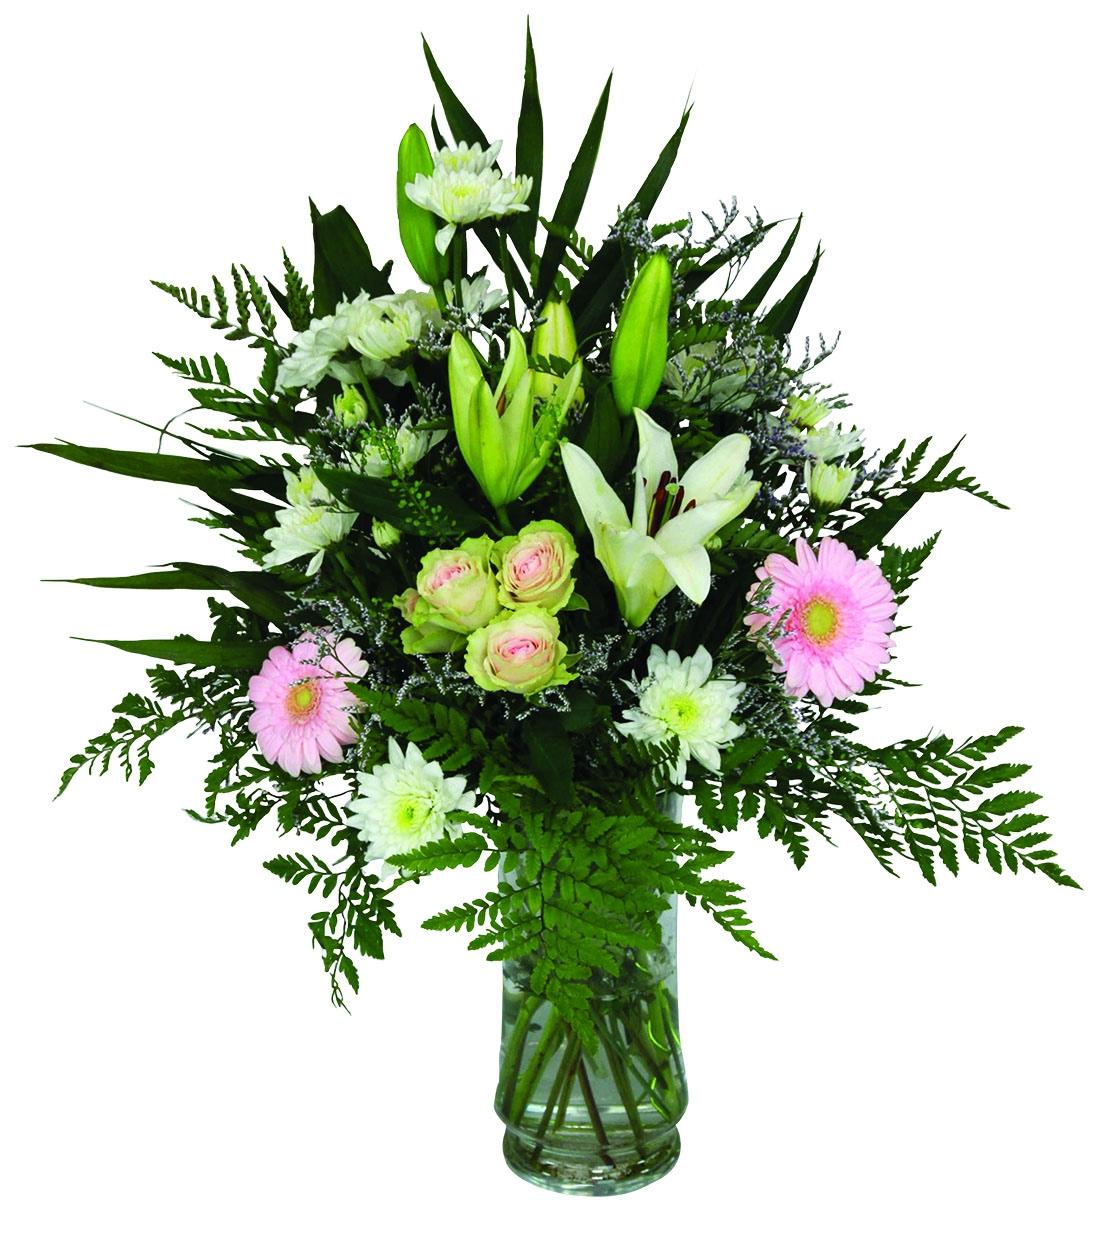 A one sided vase arrangement with white lilies, roses, mums, pink gerberas, greens and fillers.